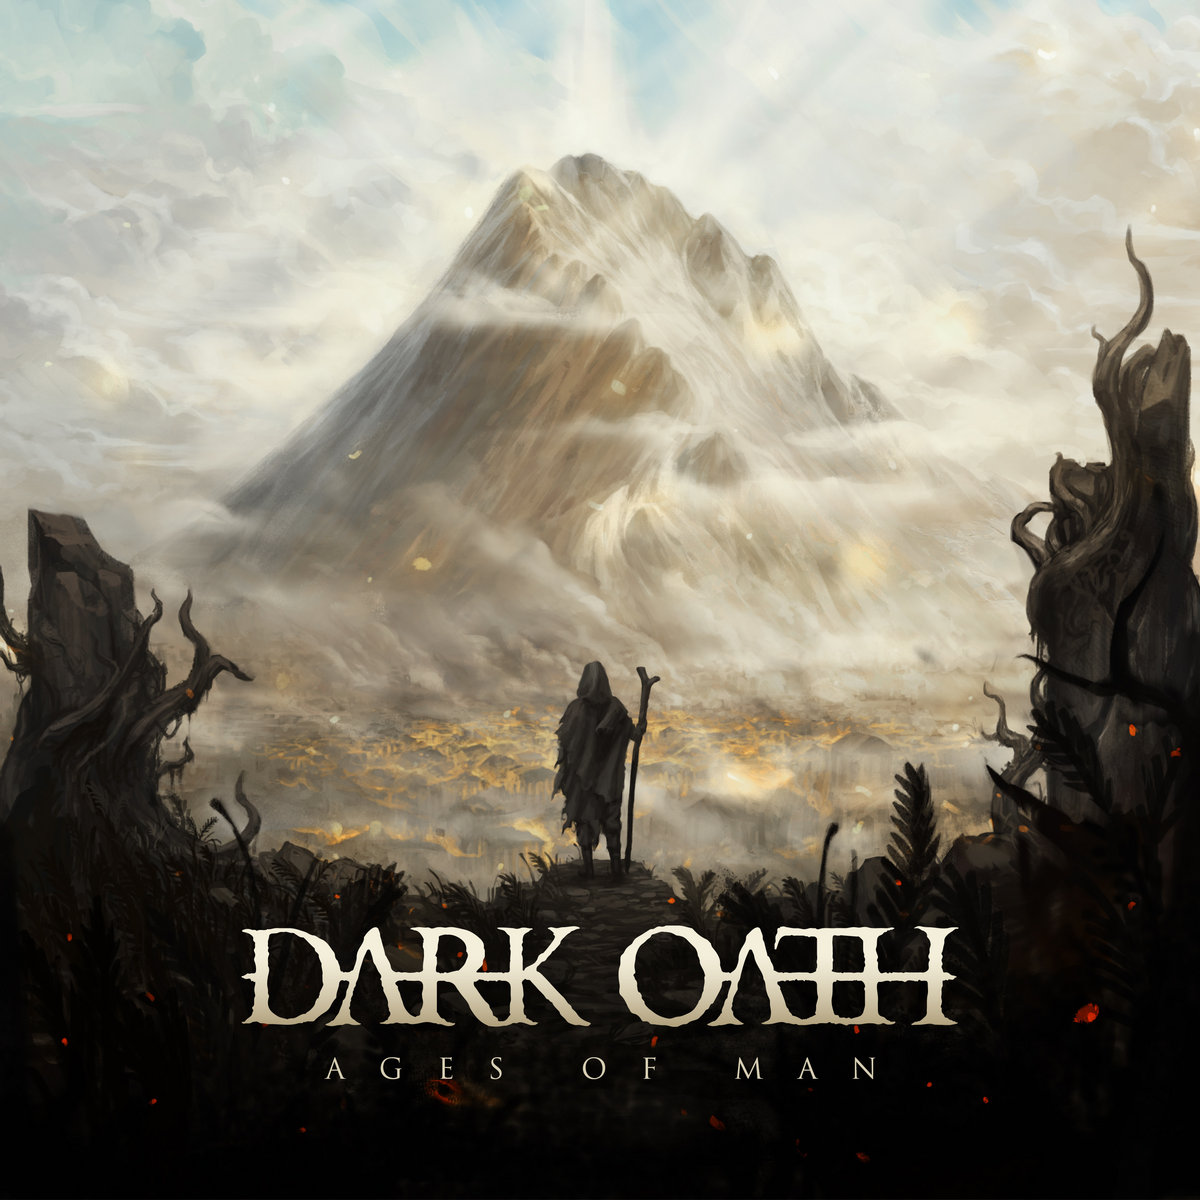 Dark Oath - Ages of Man
Epic/Symphonic Death Metal from Soure, Portugal
Release date: January 18th, 2024
darkoathmetal.bandcamp.com/music

#DarkOath #deathmetalportugal
#deathmetal #deathmetalband #femalefrontedmetal
#femalevocalist #melodicdeathmetal #melodeath
#symphonicdeathmetal